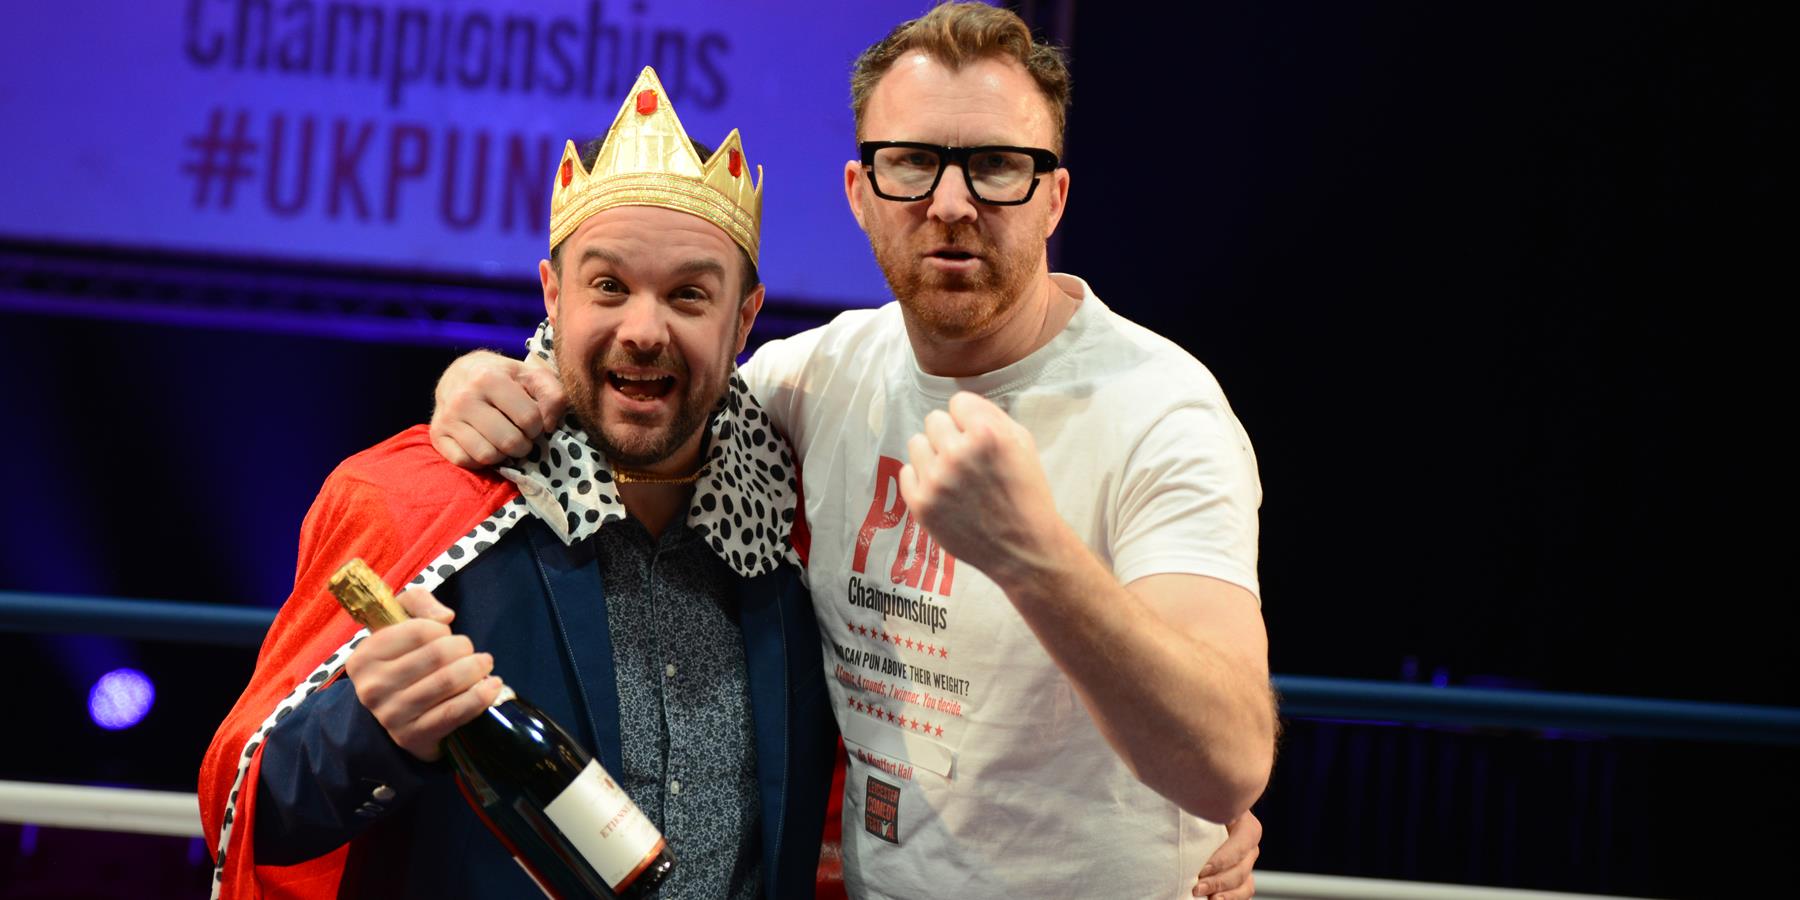 Two men one with a crown and trophy